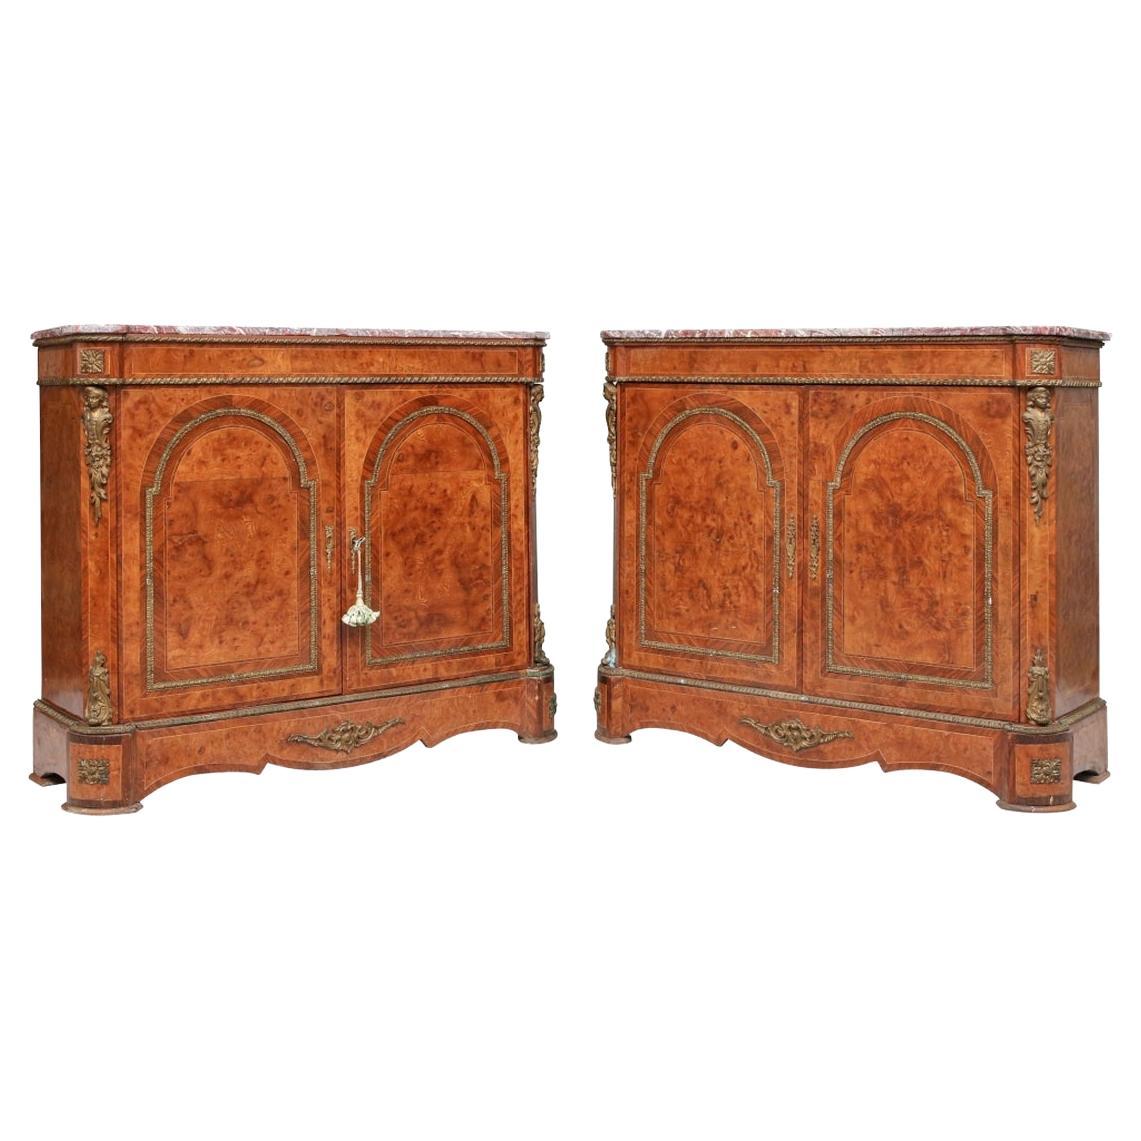 Pair of Exceptional Antique French Marble Top Figured Wood Cabinets